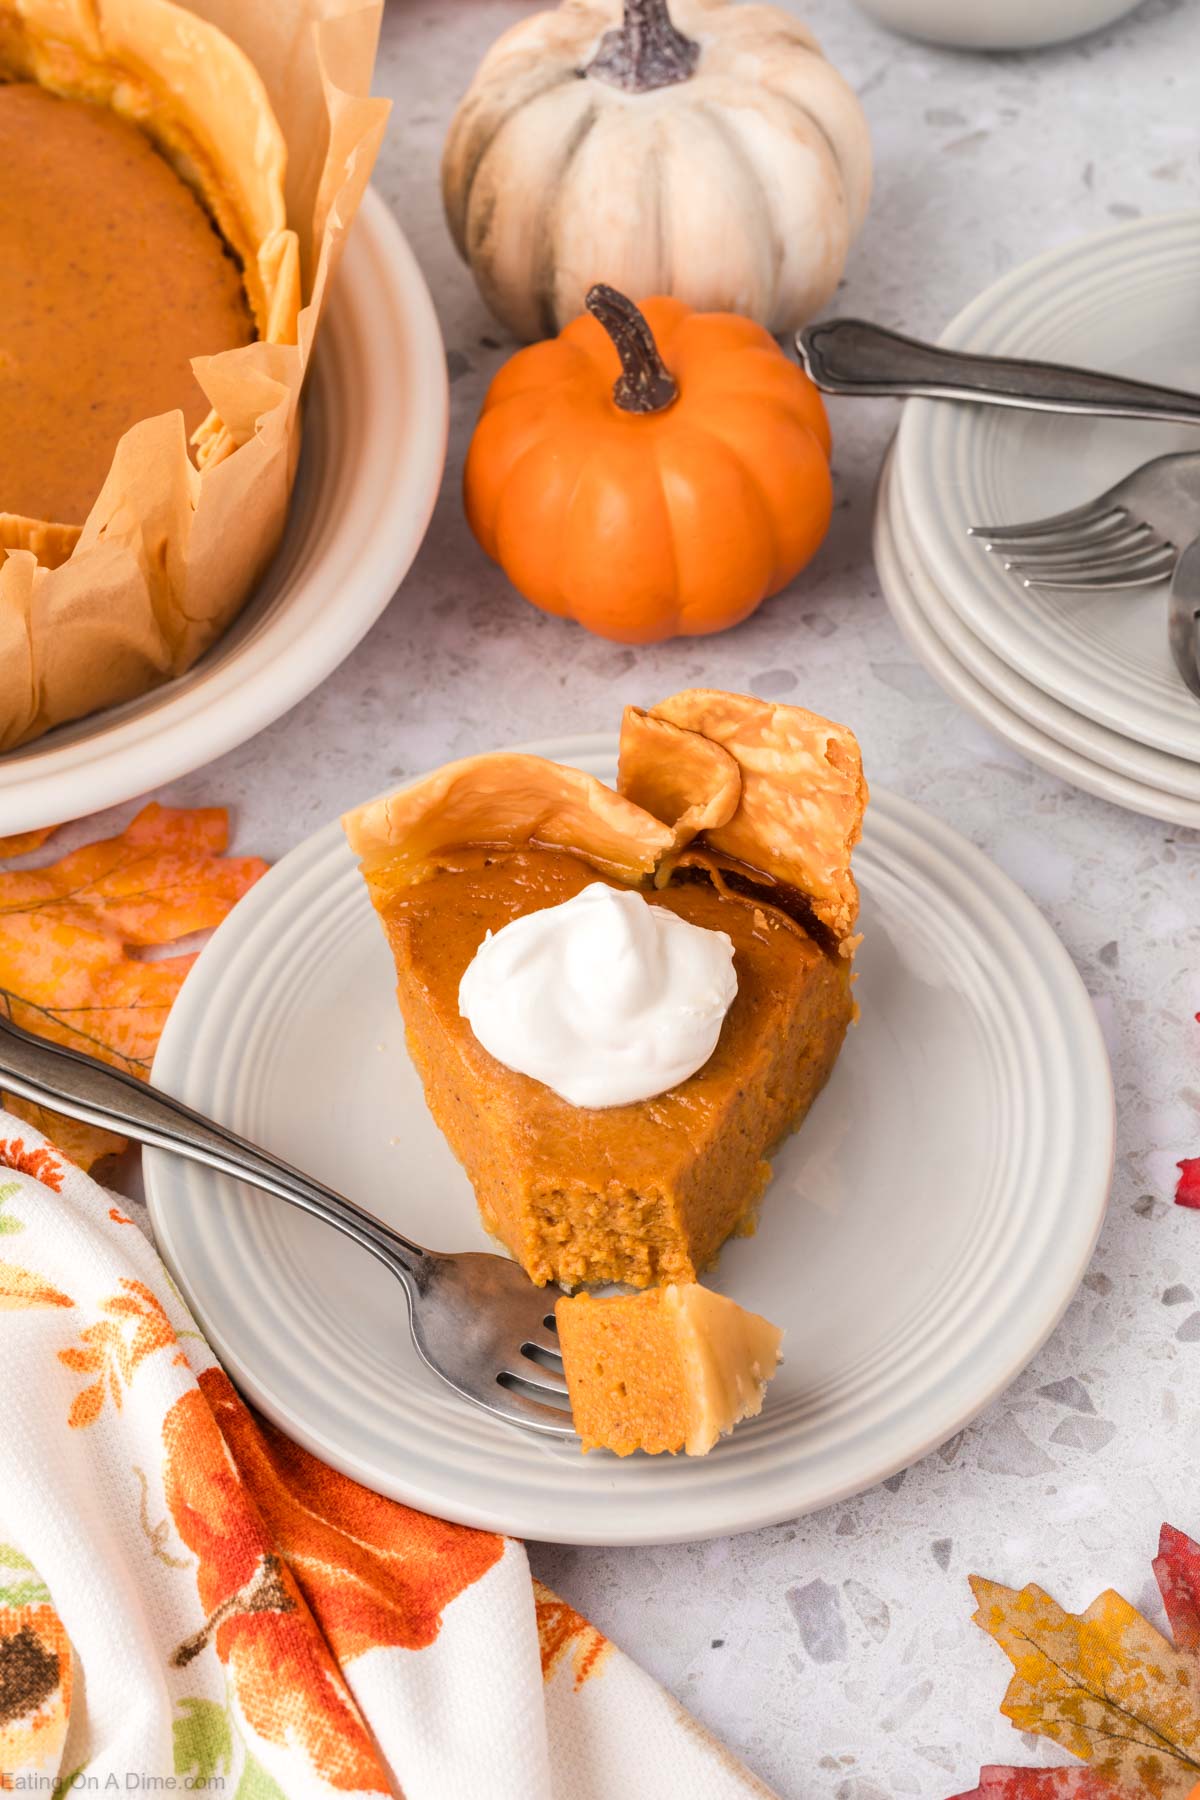 Slice of pumpkin pie on a plate with a dollop of cool whip